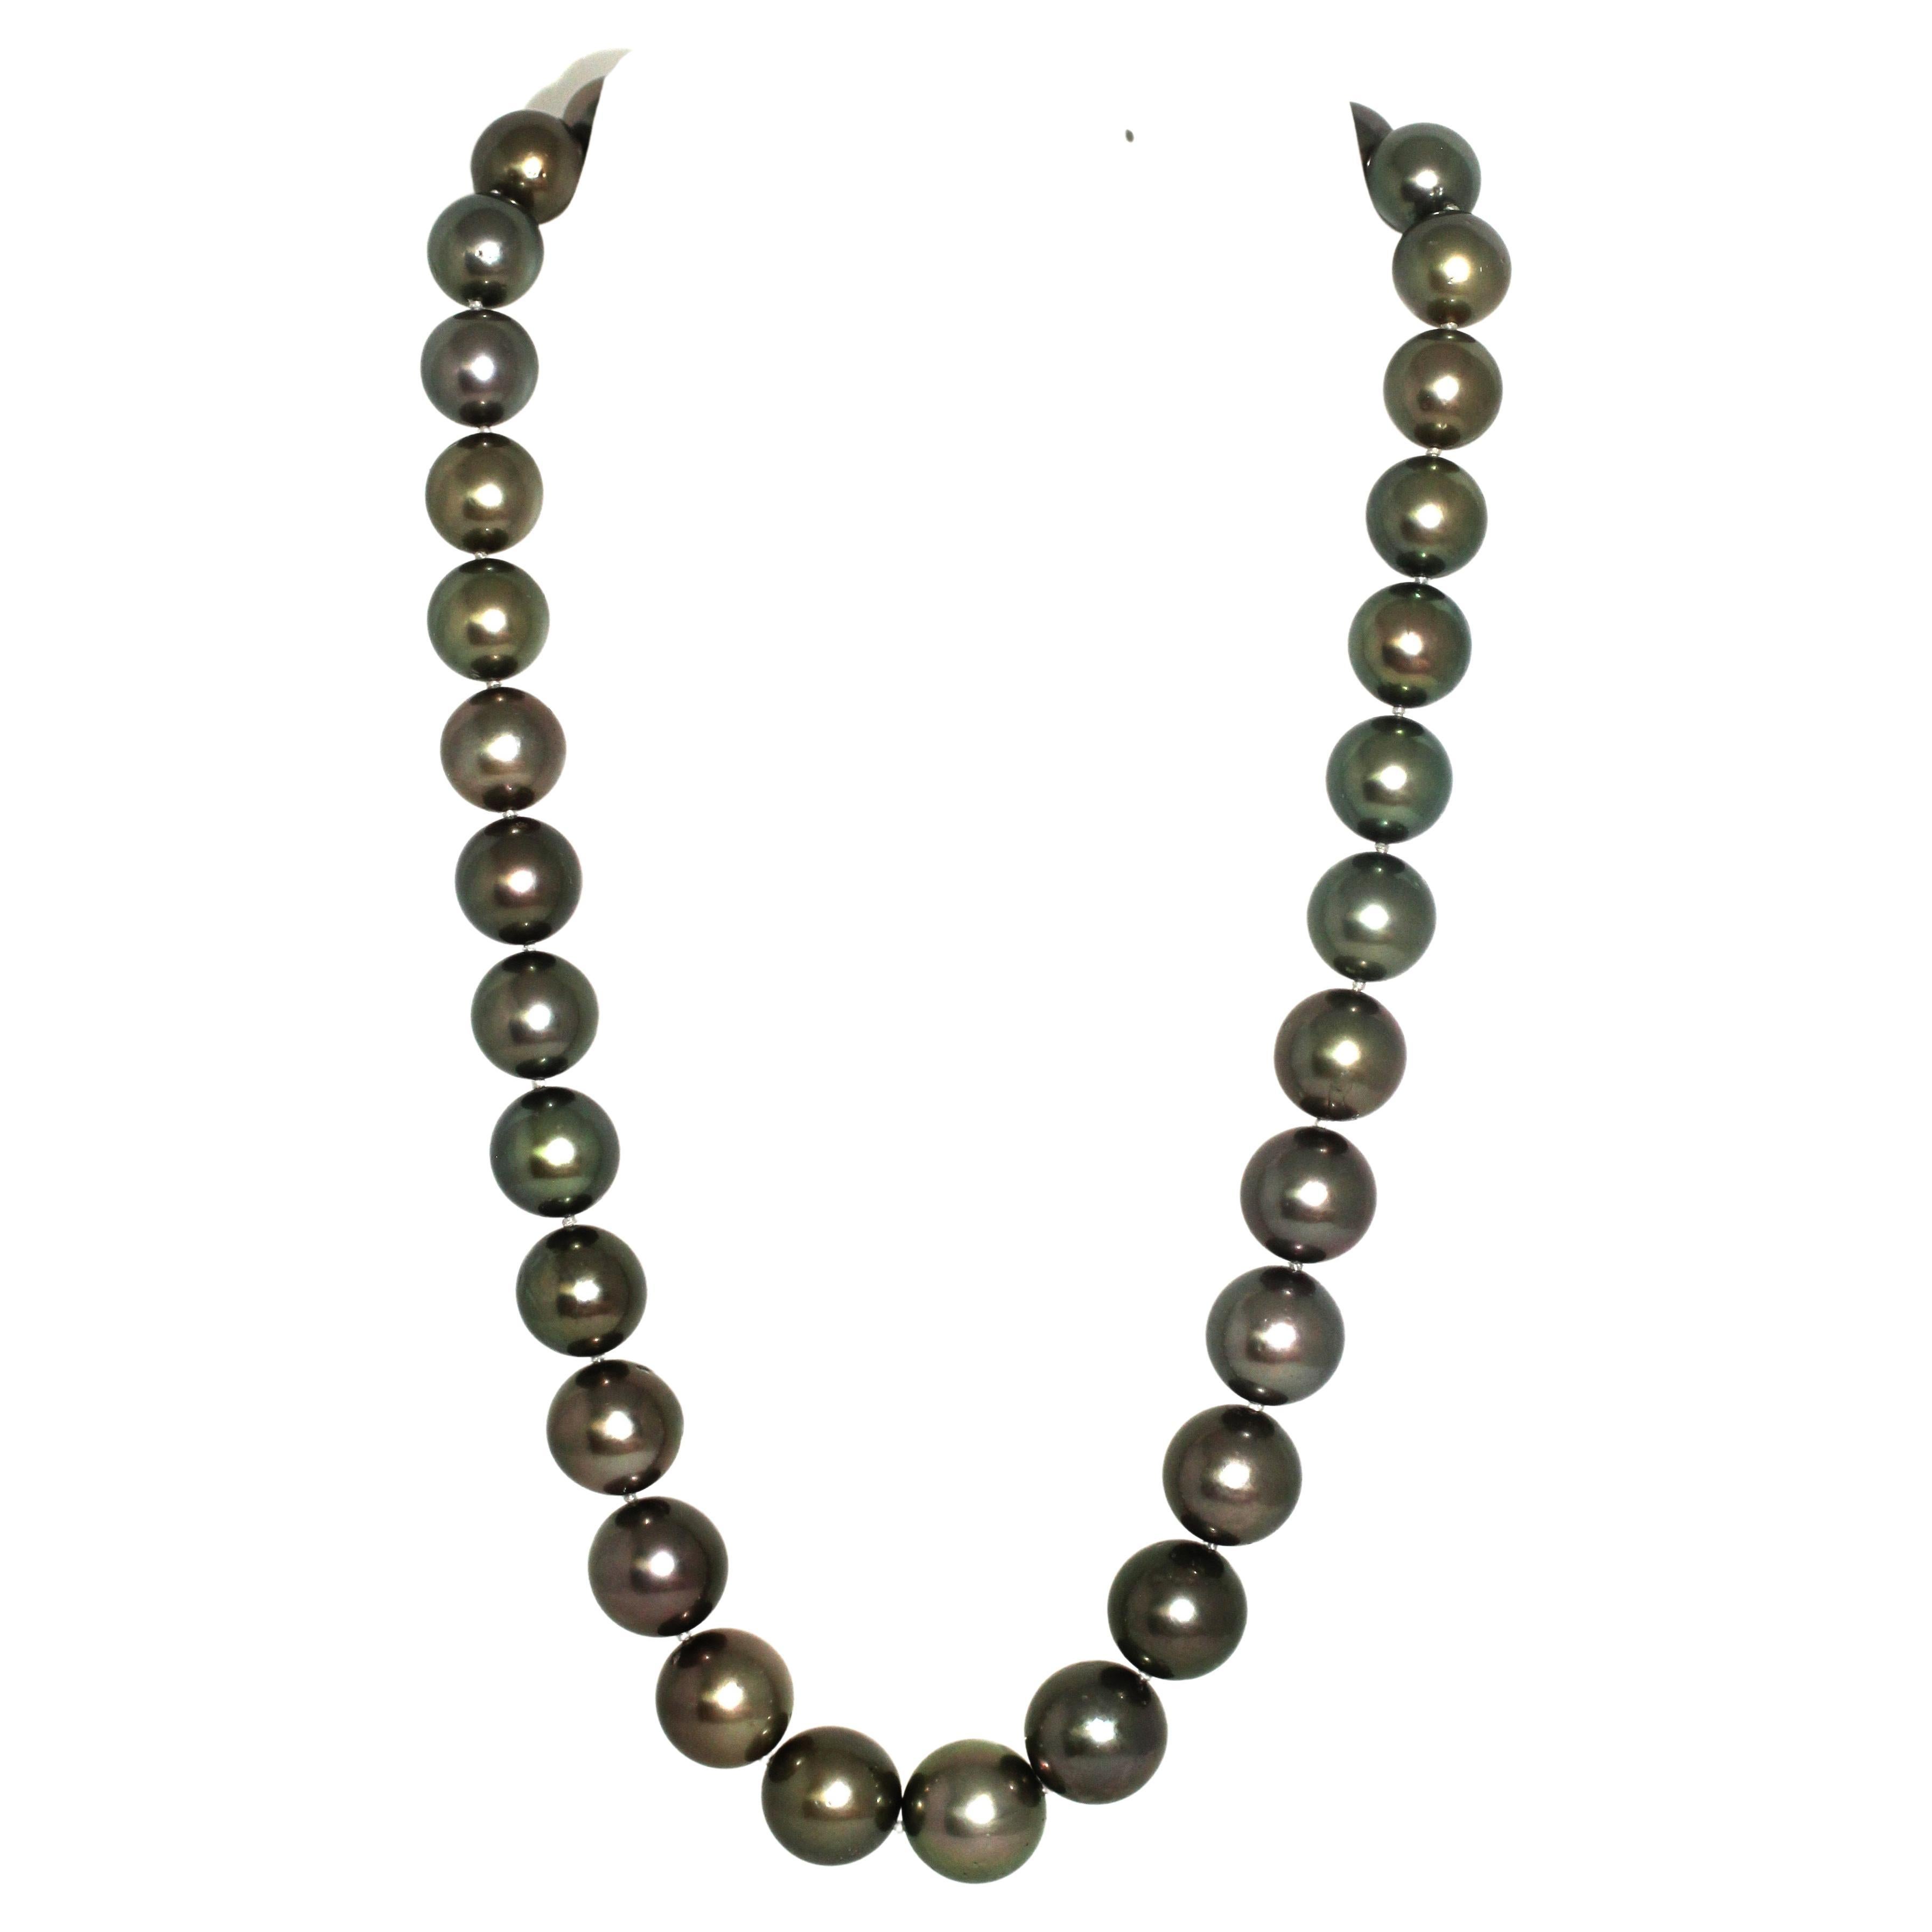 Hakimoto By Jewel Of Ocean 18K Tahitian South Sea Pearl Strand Necklace
18K White Gold  
Weight (g): 77.3
Cultured Tahitian South Sea Pearl 
Pearl Size: 10X13mm 
Pearl Shape: Round 
Body color: Black
Orient: Very Good
Luster: Very Good 
Surface: 